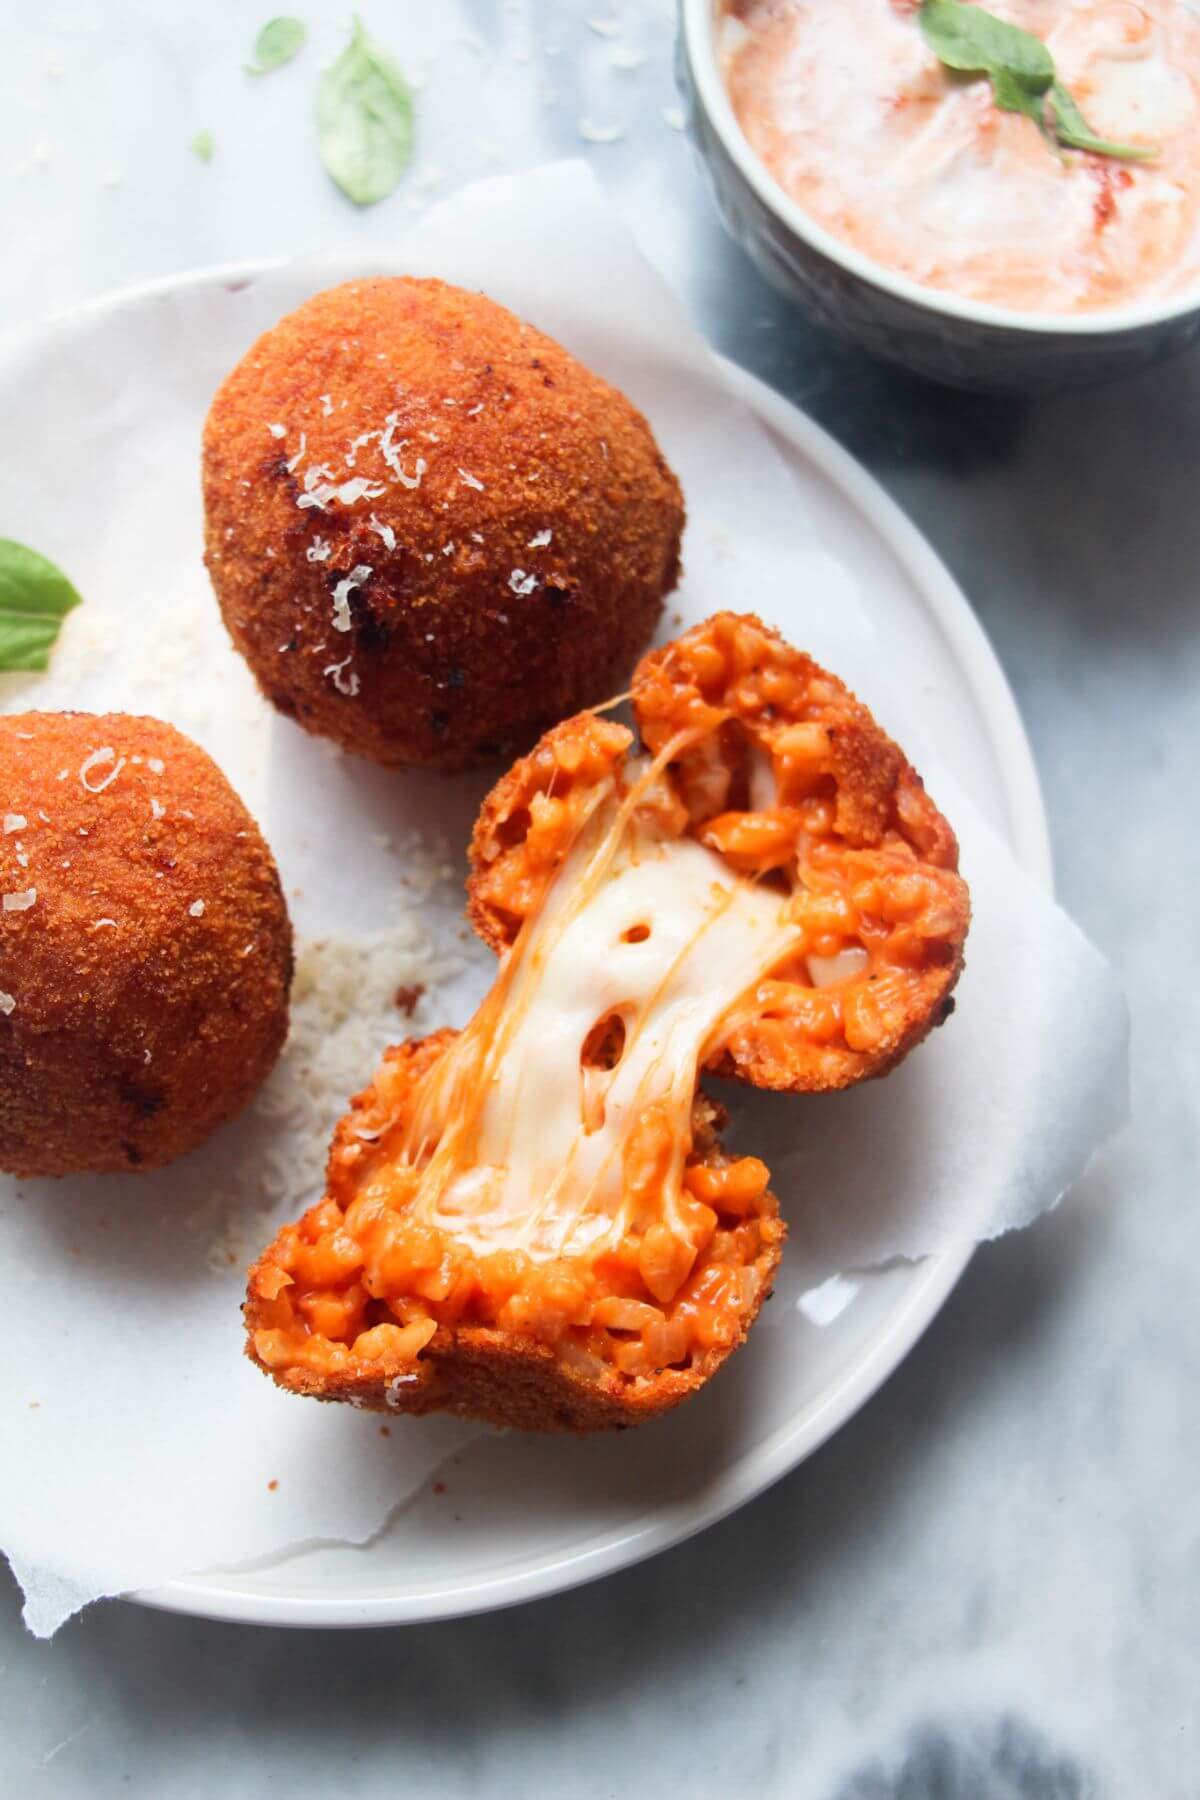 3 whole arancini on a small plate with a open arancini with cheese spilling out, with aioli with pesto on the side in a small bowl.